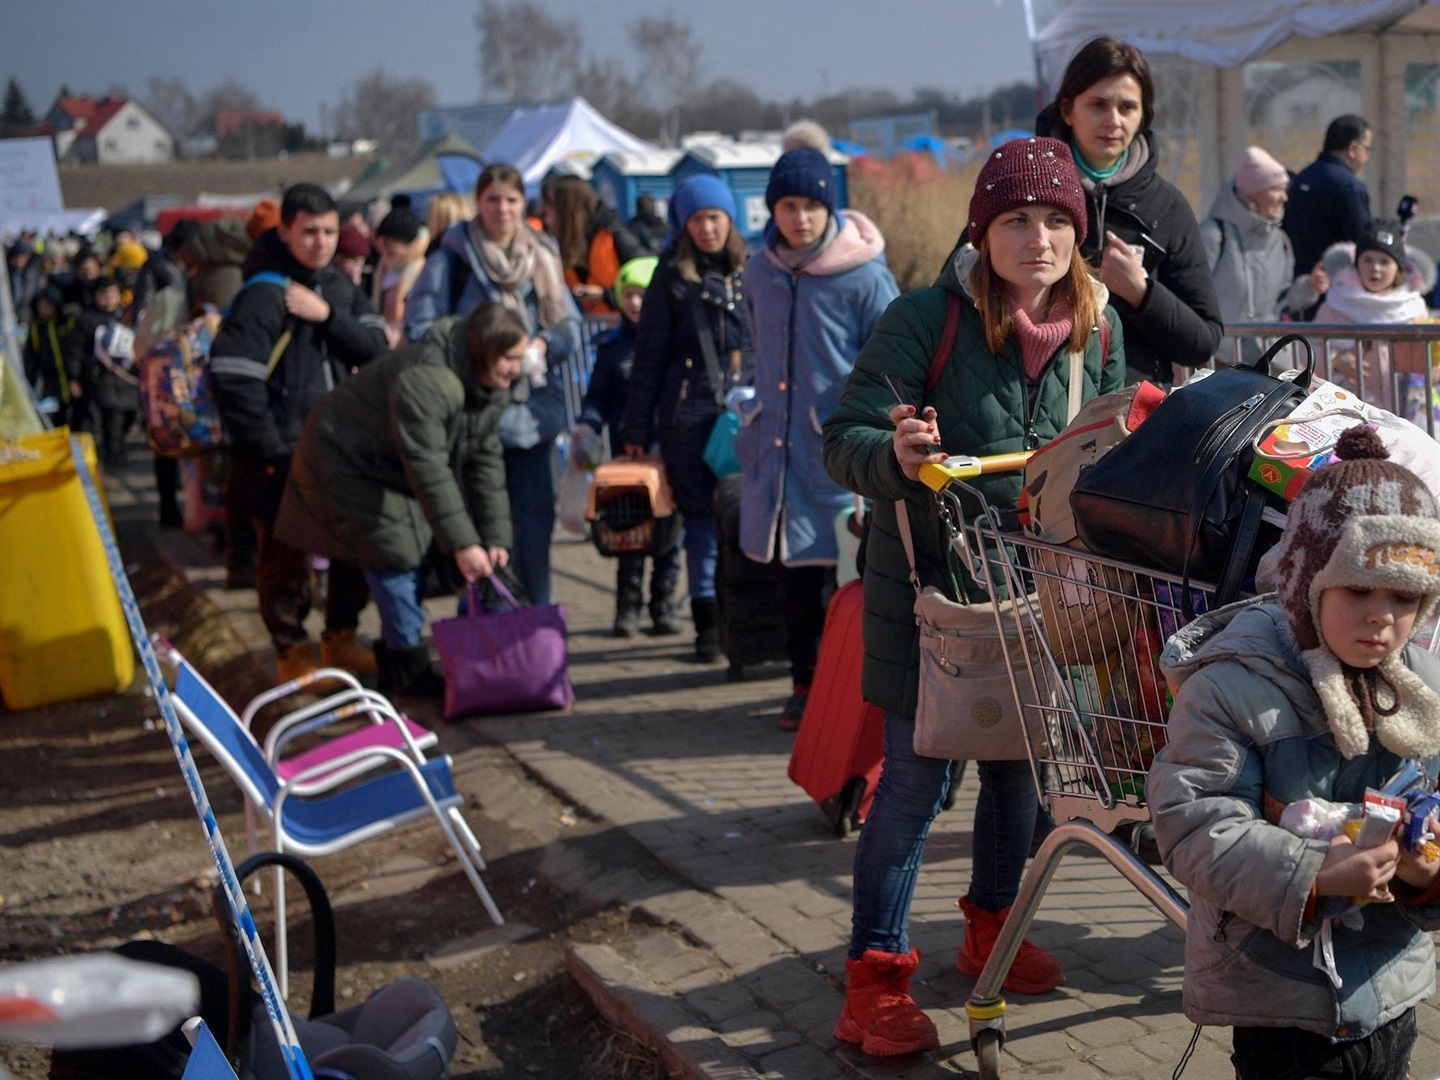 Ukrainian refugees are seen after crossing into Poland on March 13, 2022. LOUISA GOULIAMAKI/AFP via Getty Images